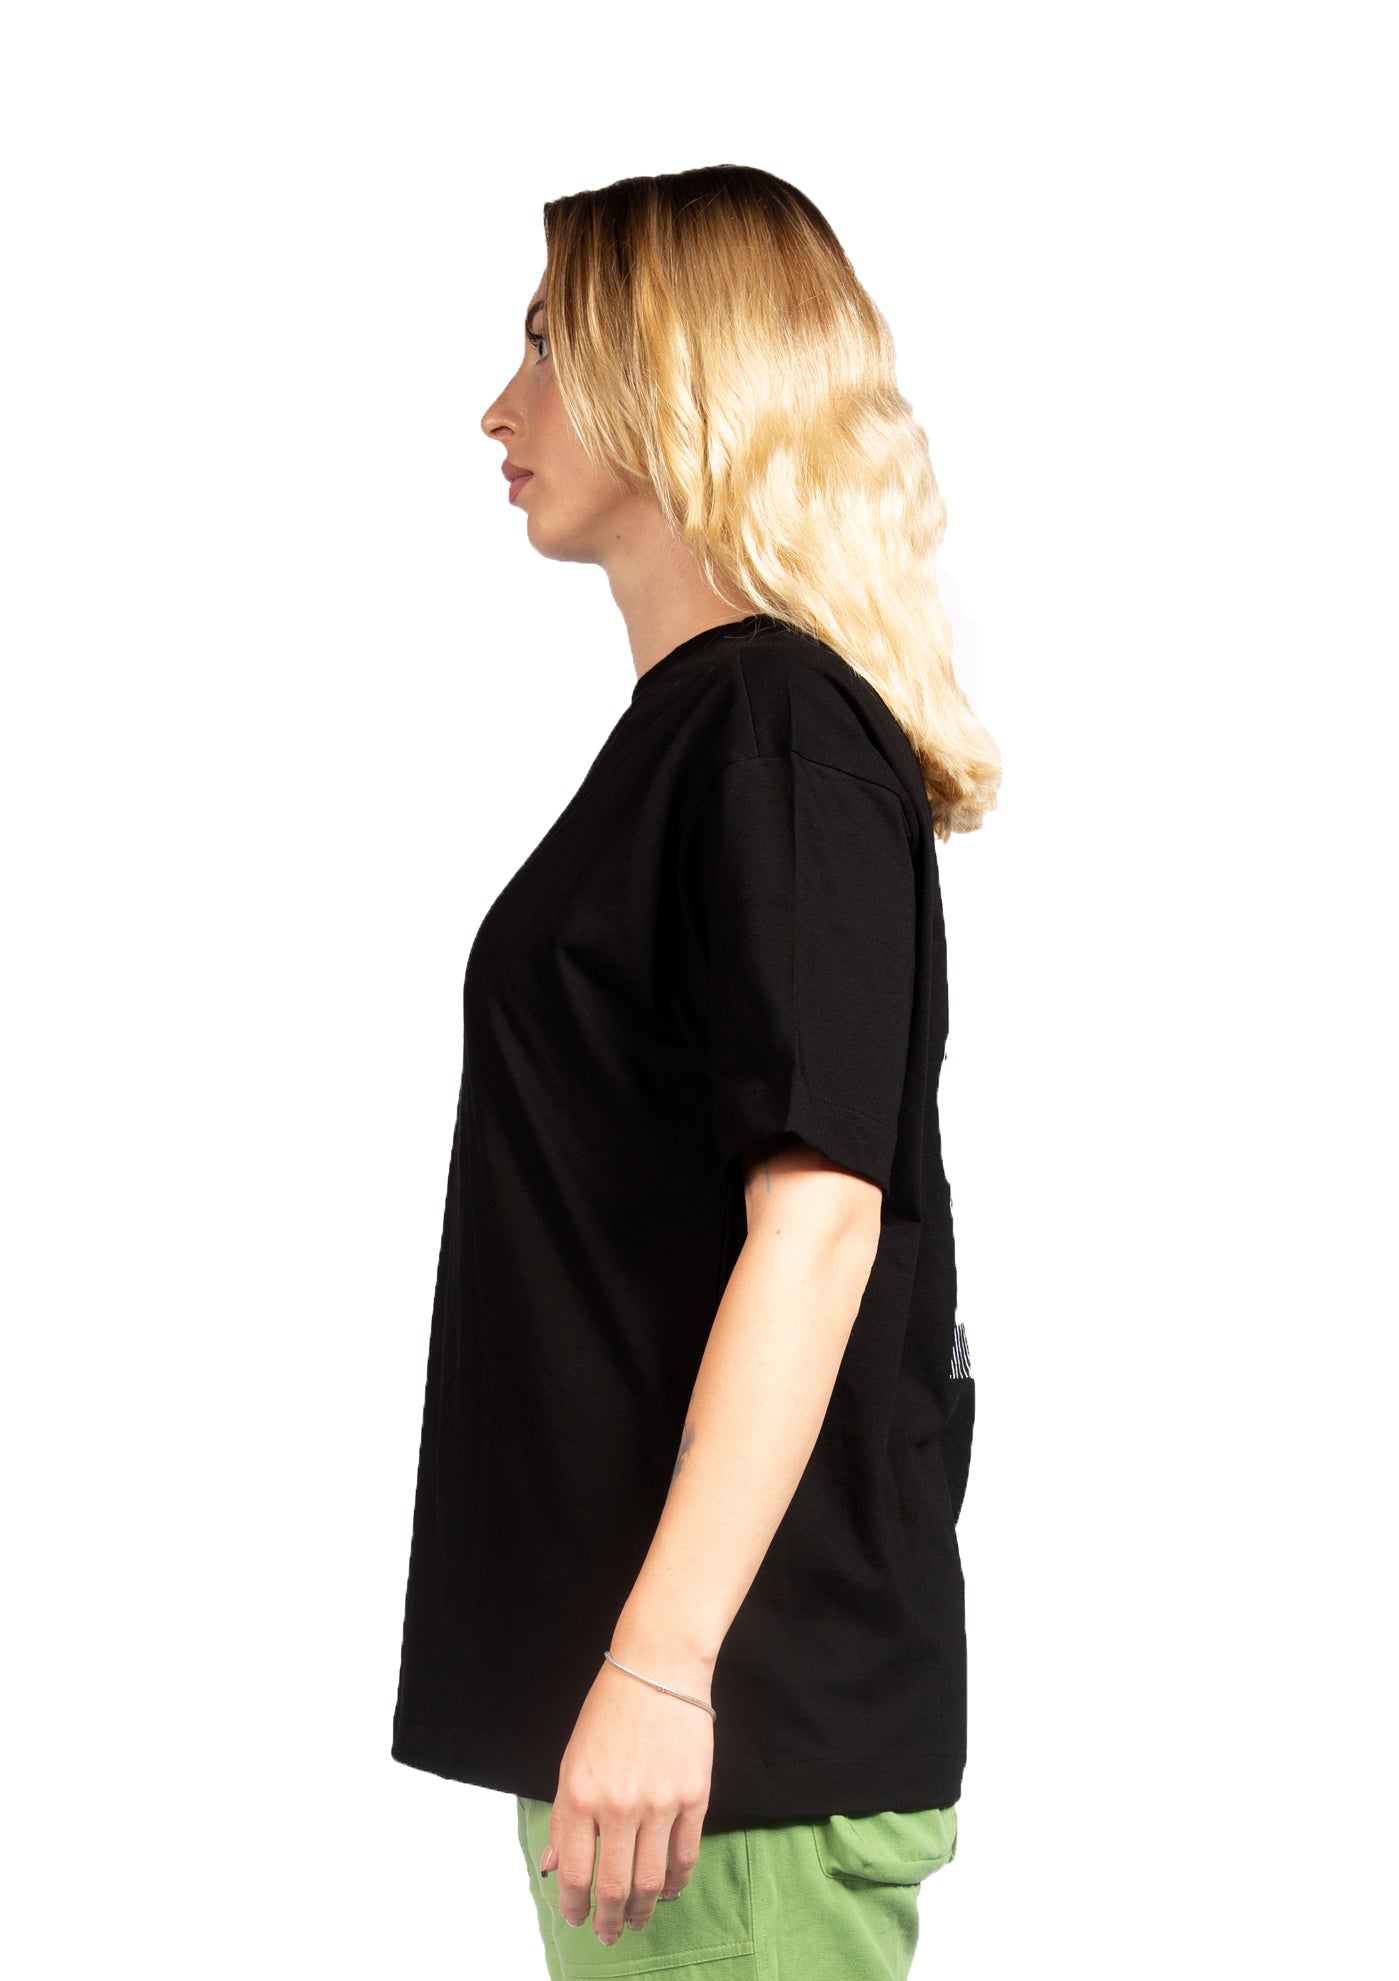 Signature Face Oversized printed Black T-shirt for her .